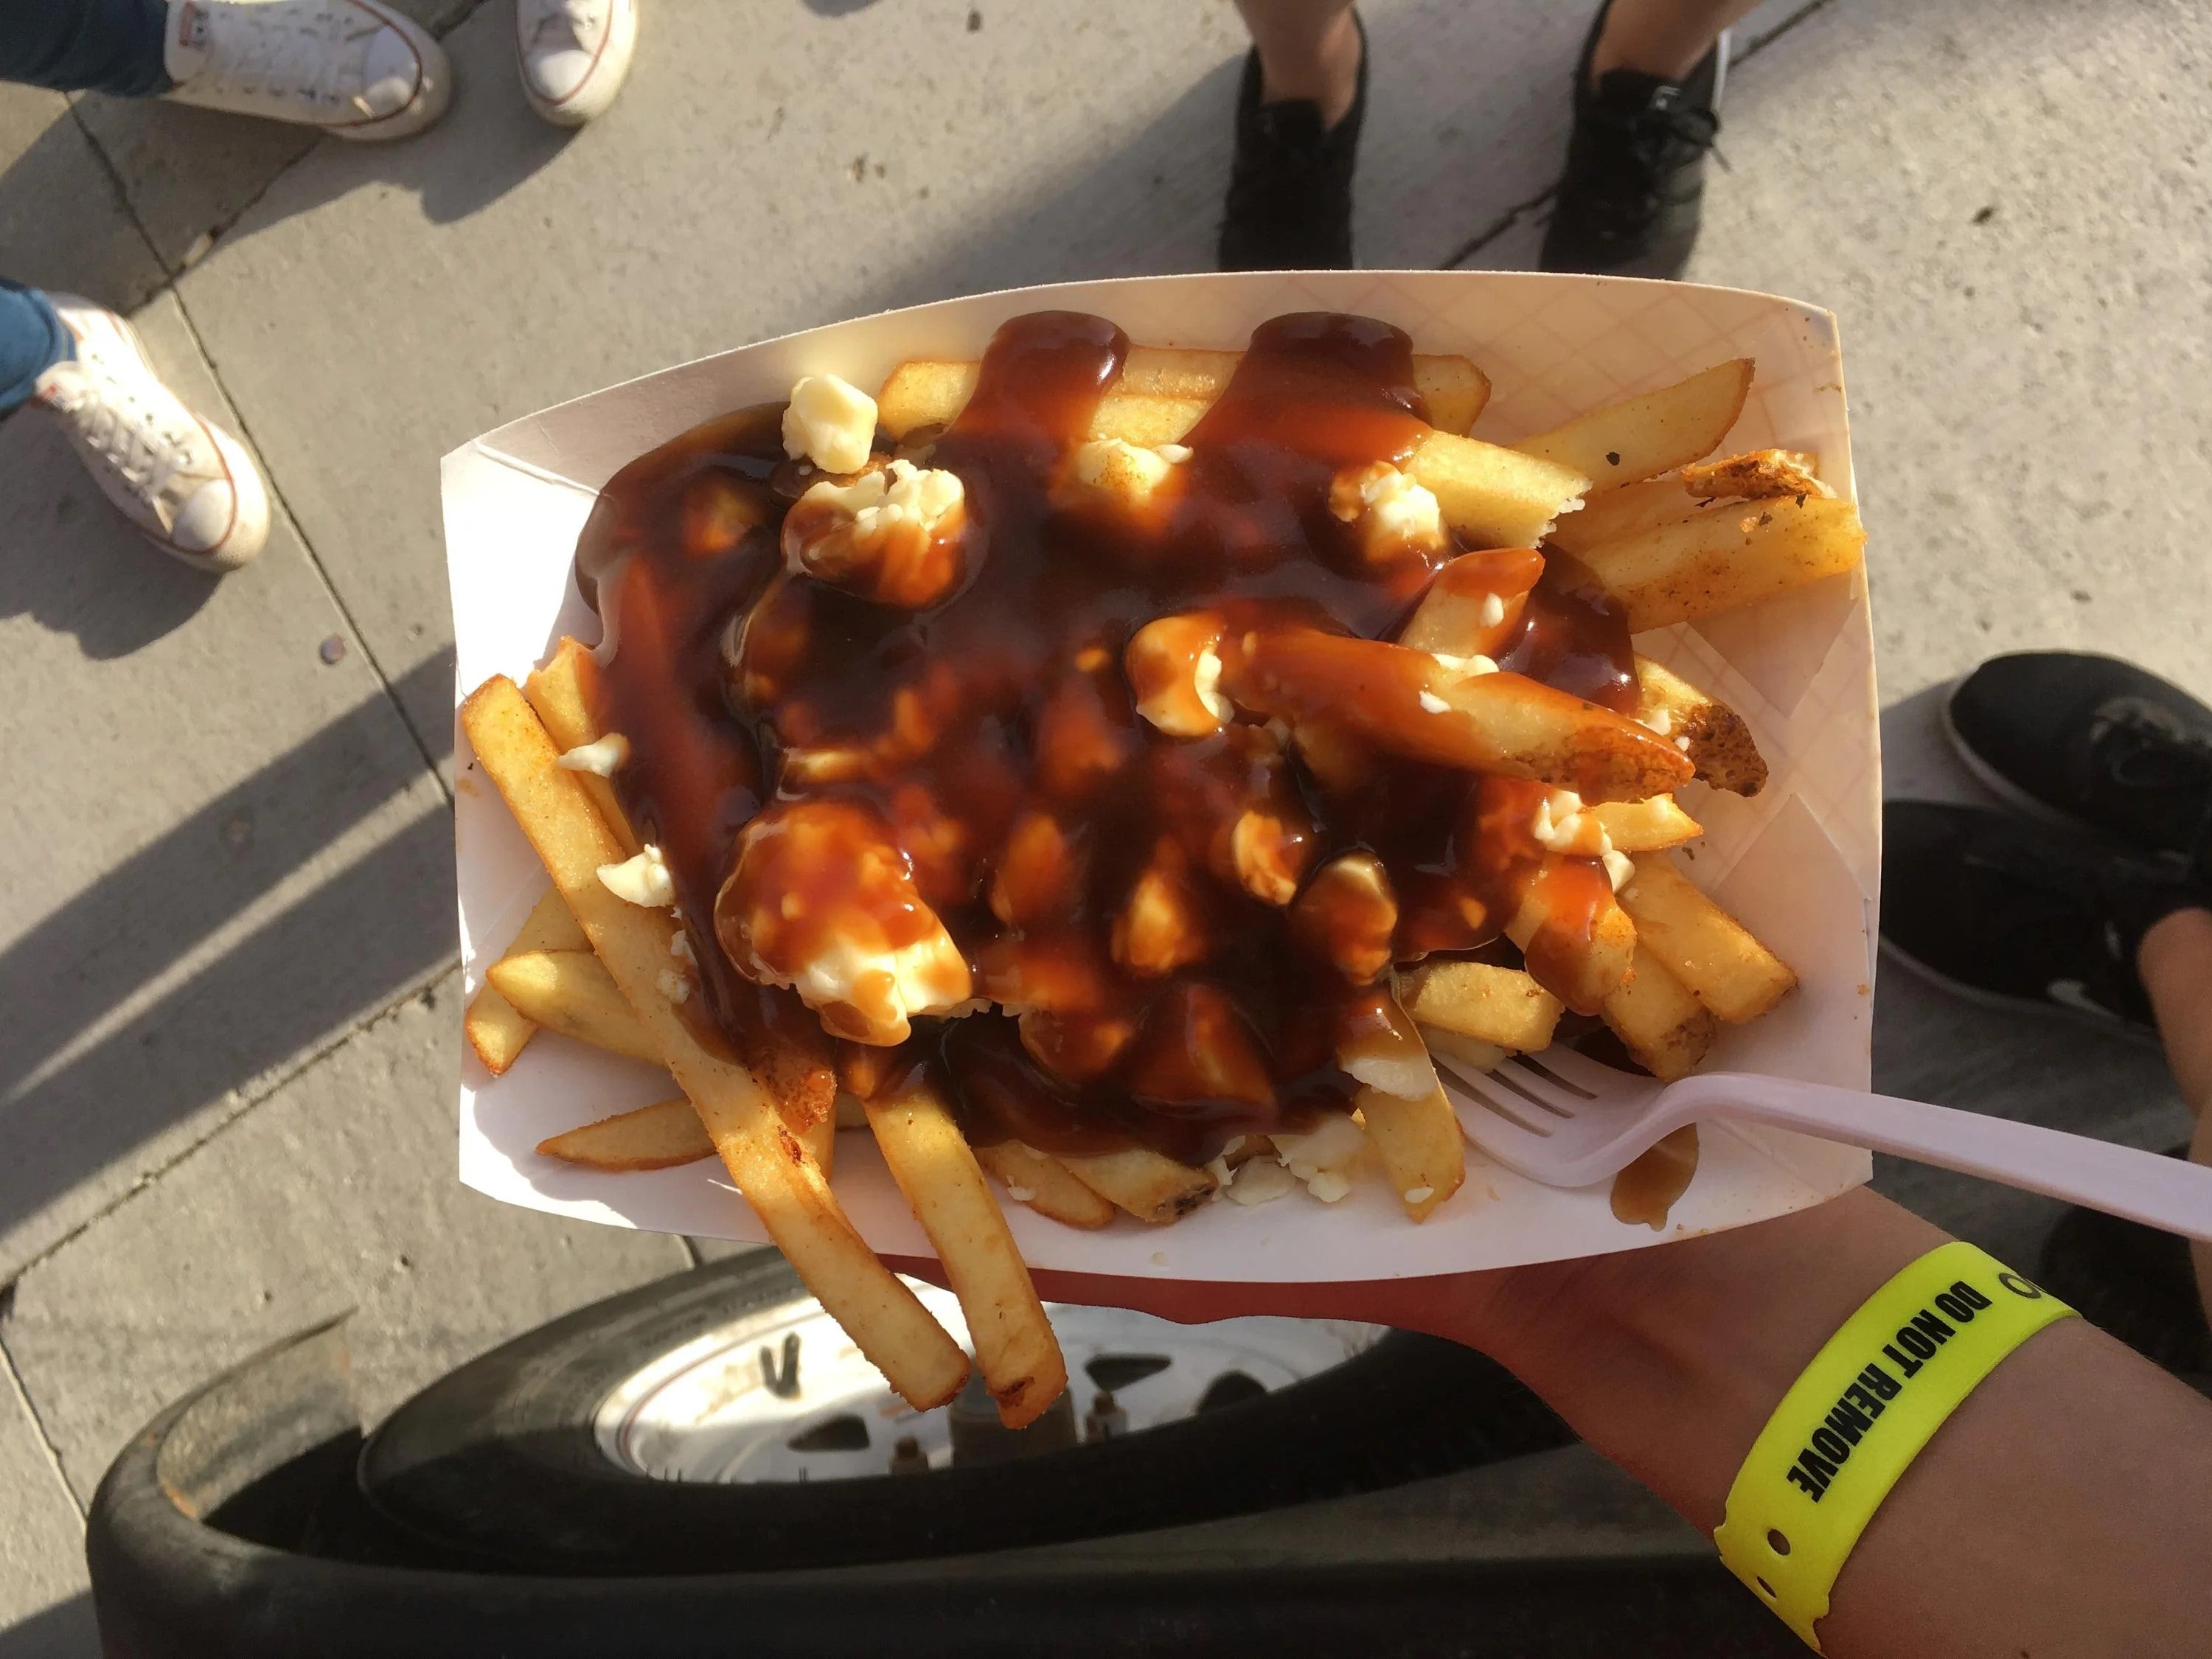 Poutine - a classic Canadian dish of fries with cheese curds and gravy.